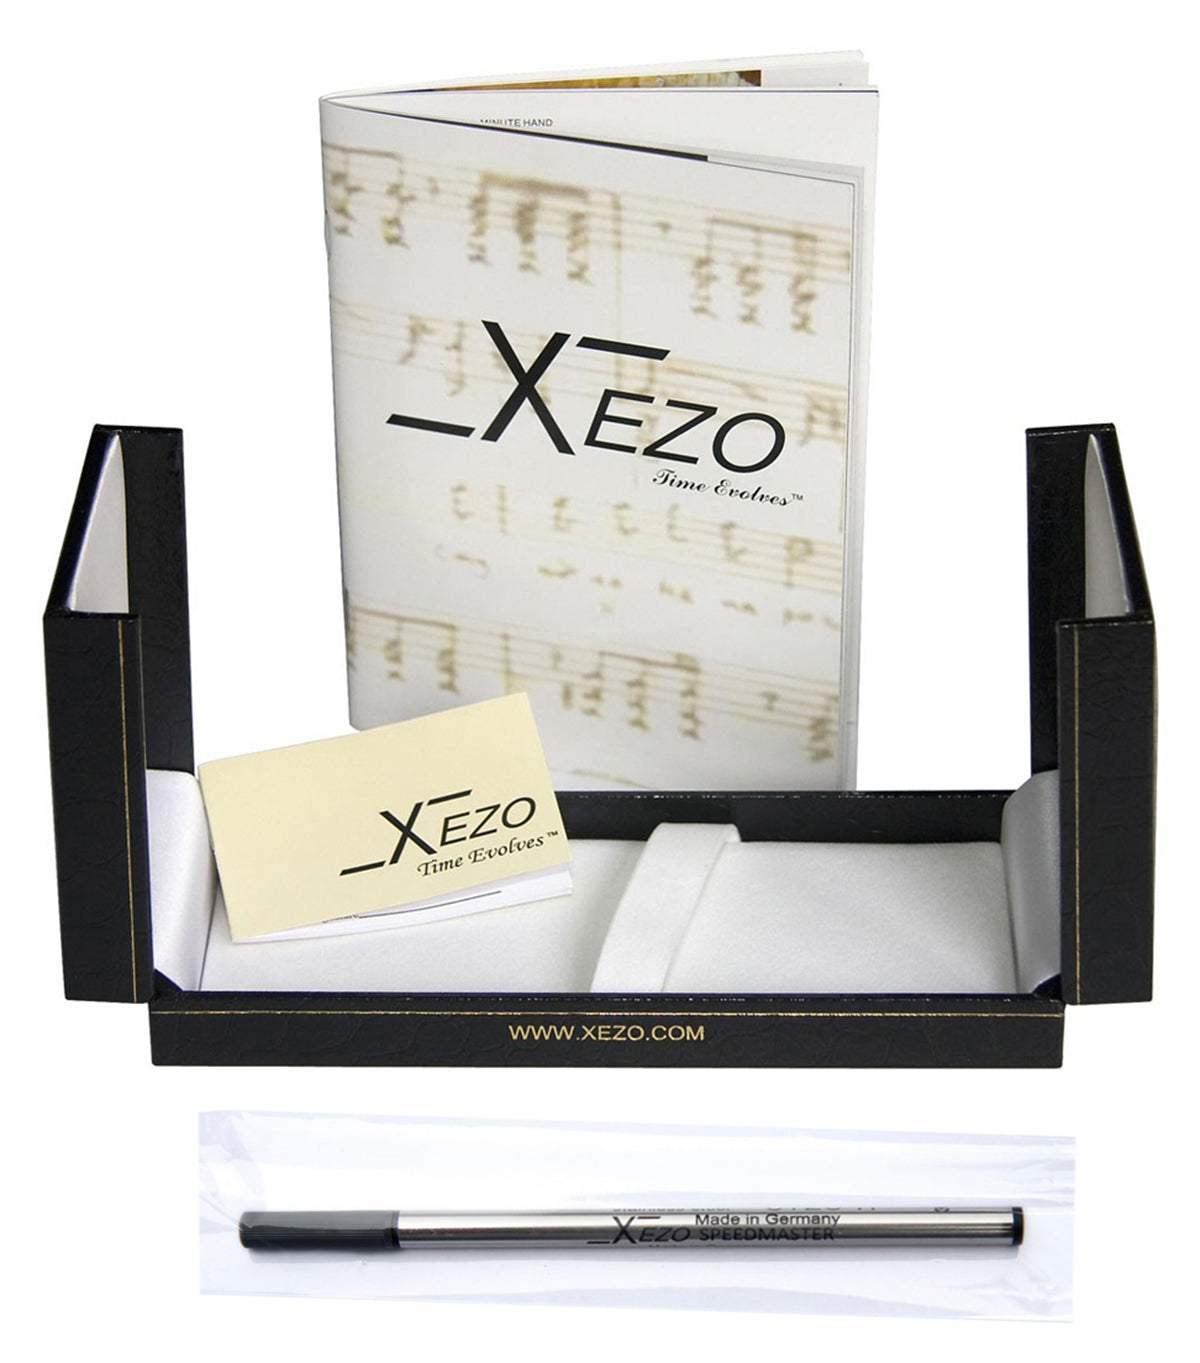 Xezo - black gift box, certificate, manual, and gel ink cartridge of the  Incognito Blue R-1 rollerball pen